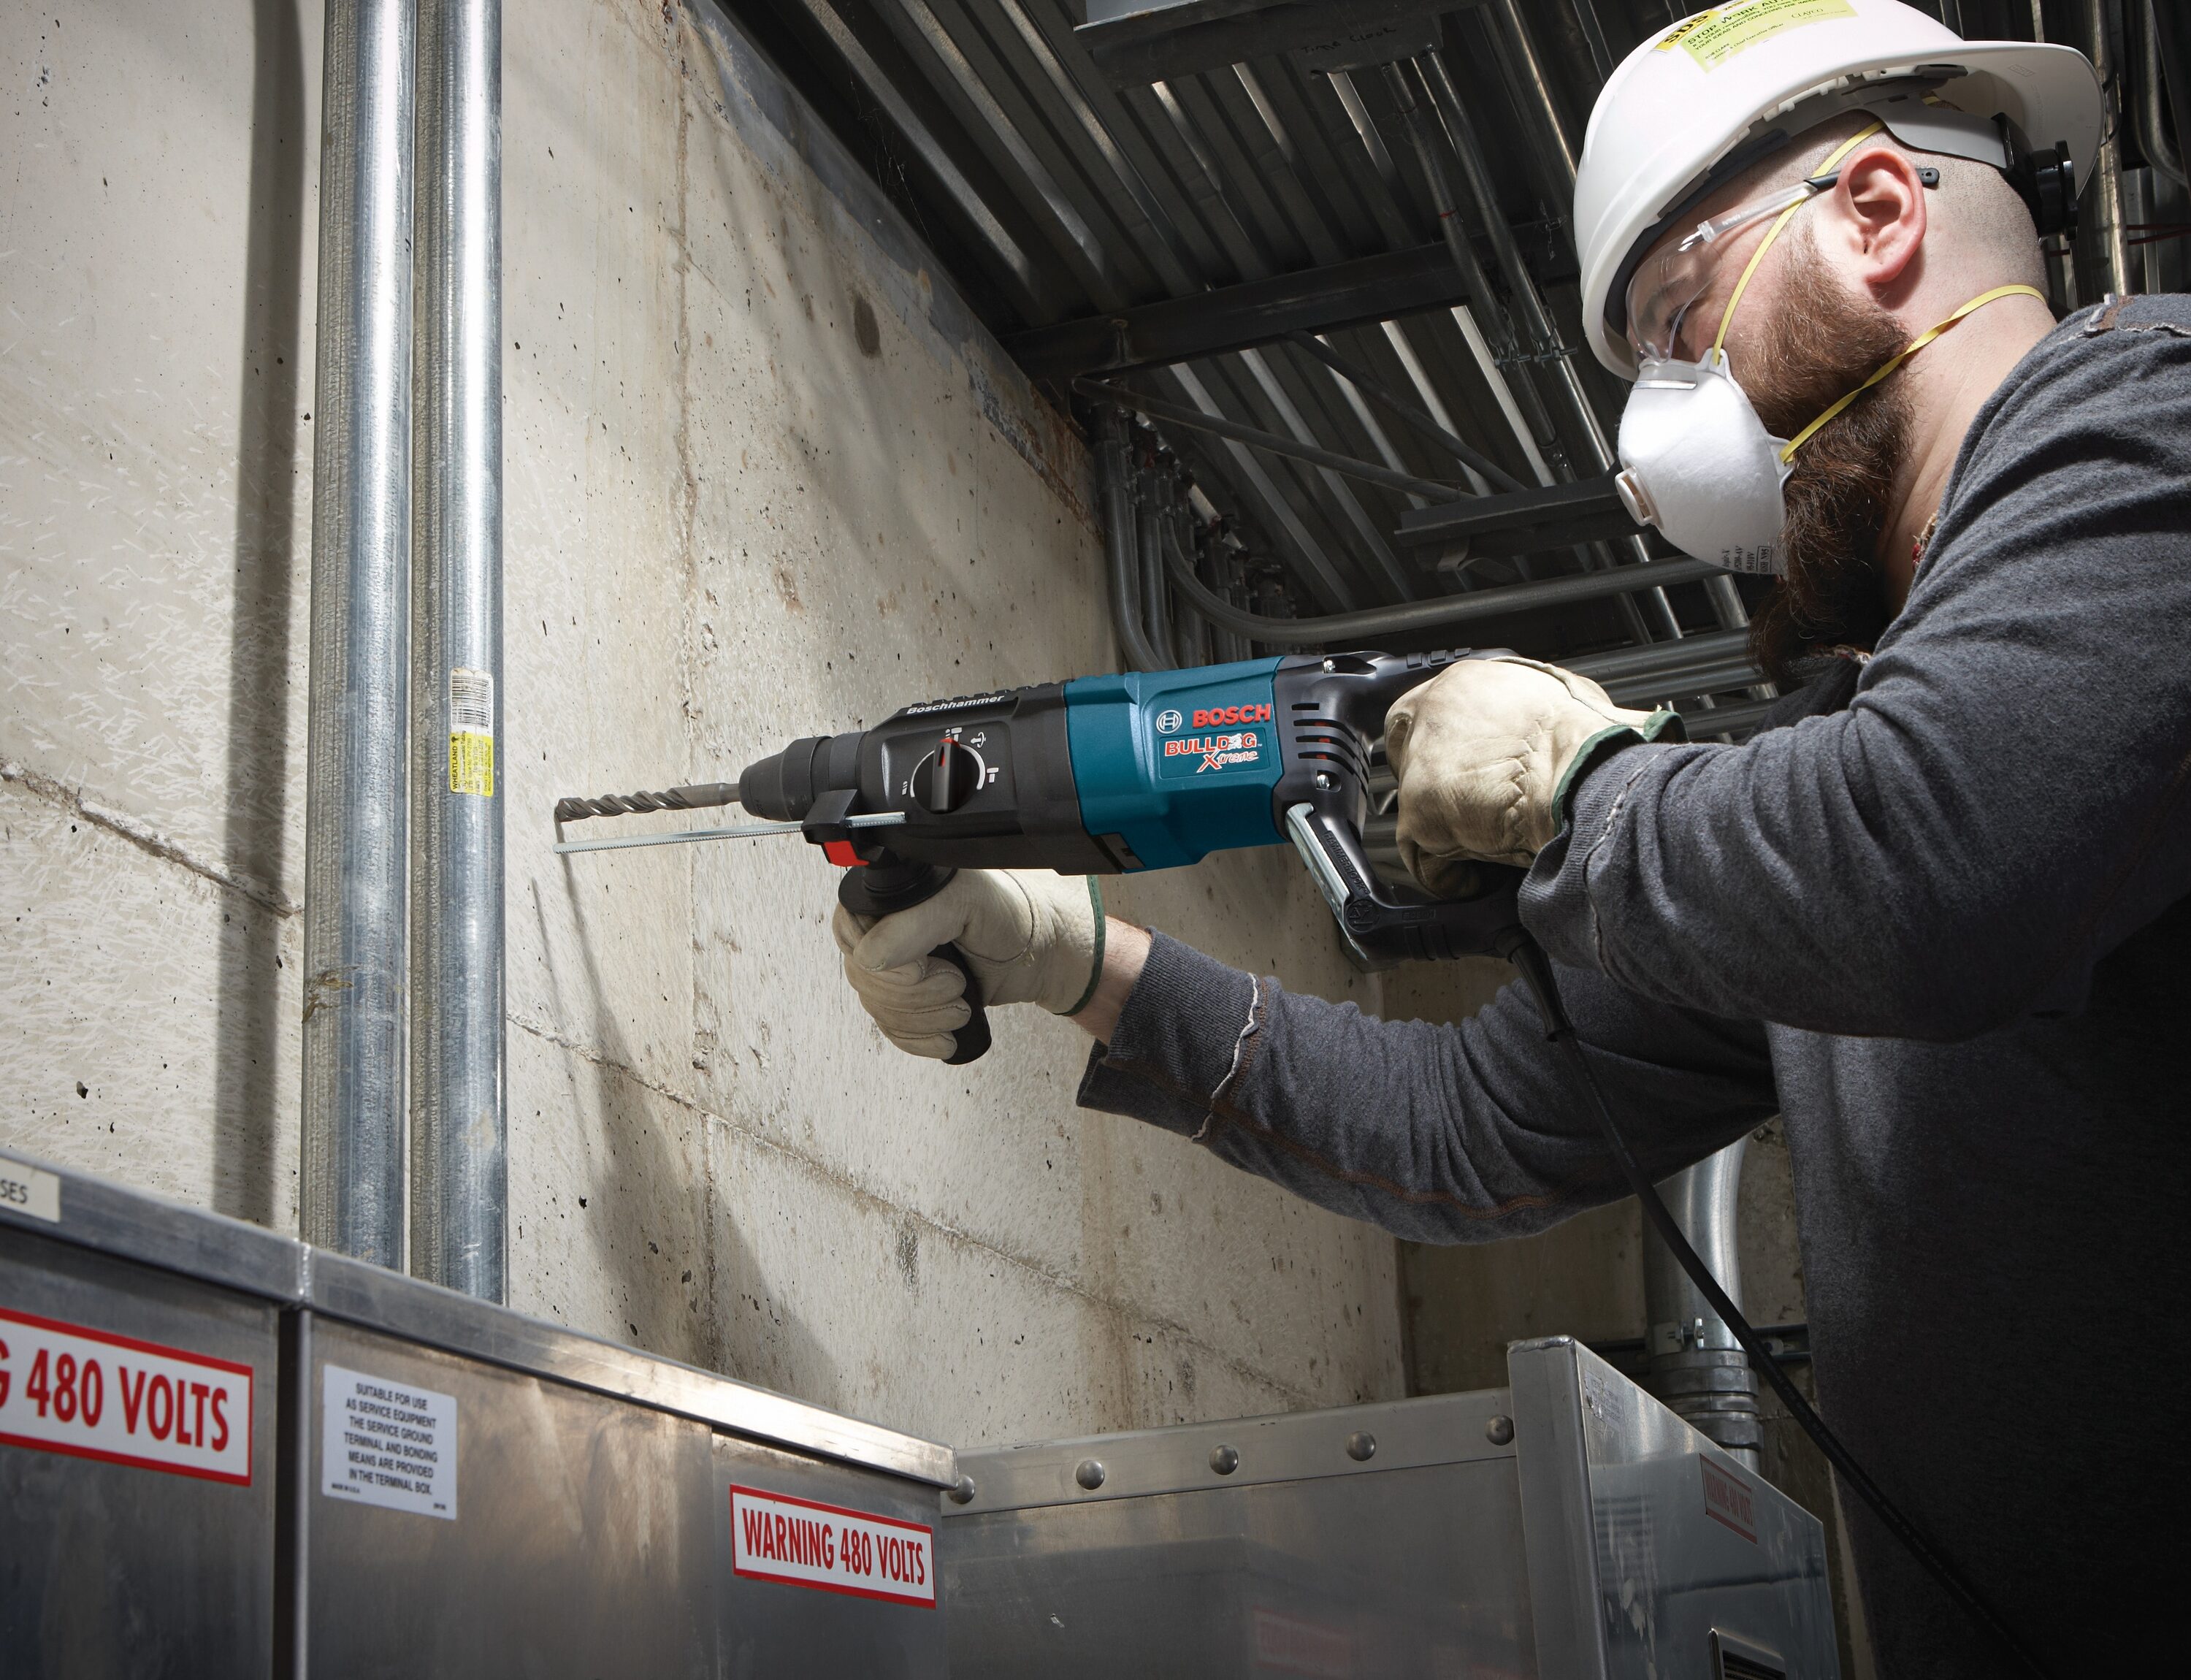 Bosch Bulldog 8-Amp Sds-plus Variable Speed Corded Rotary Hammer Drill in  the Rotary Hammer Drills department at